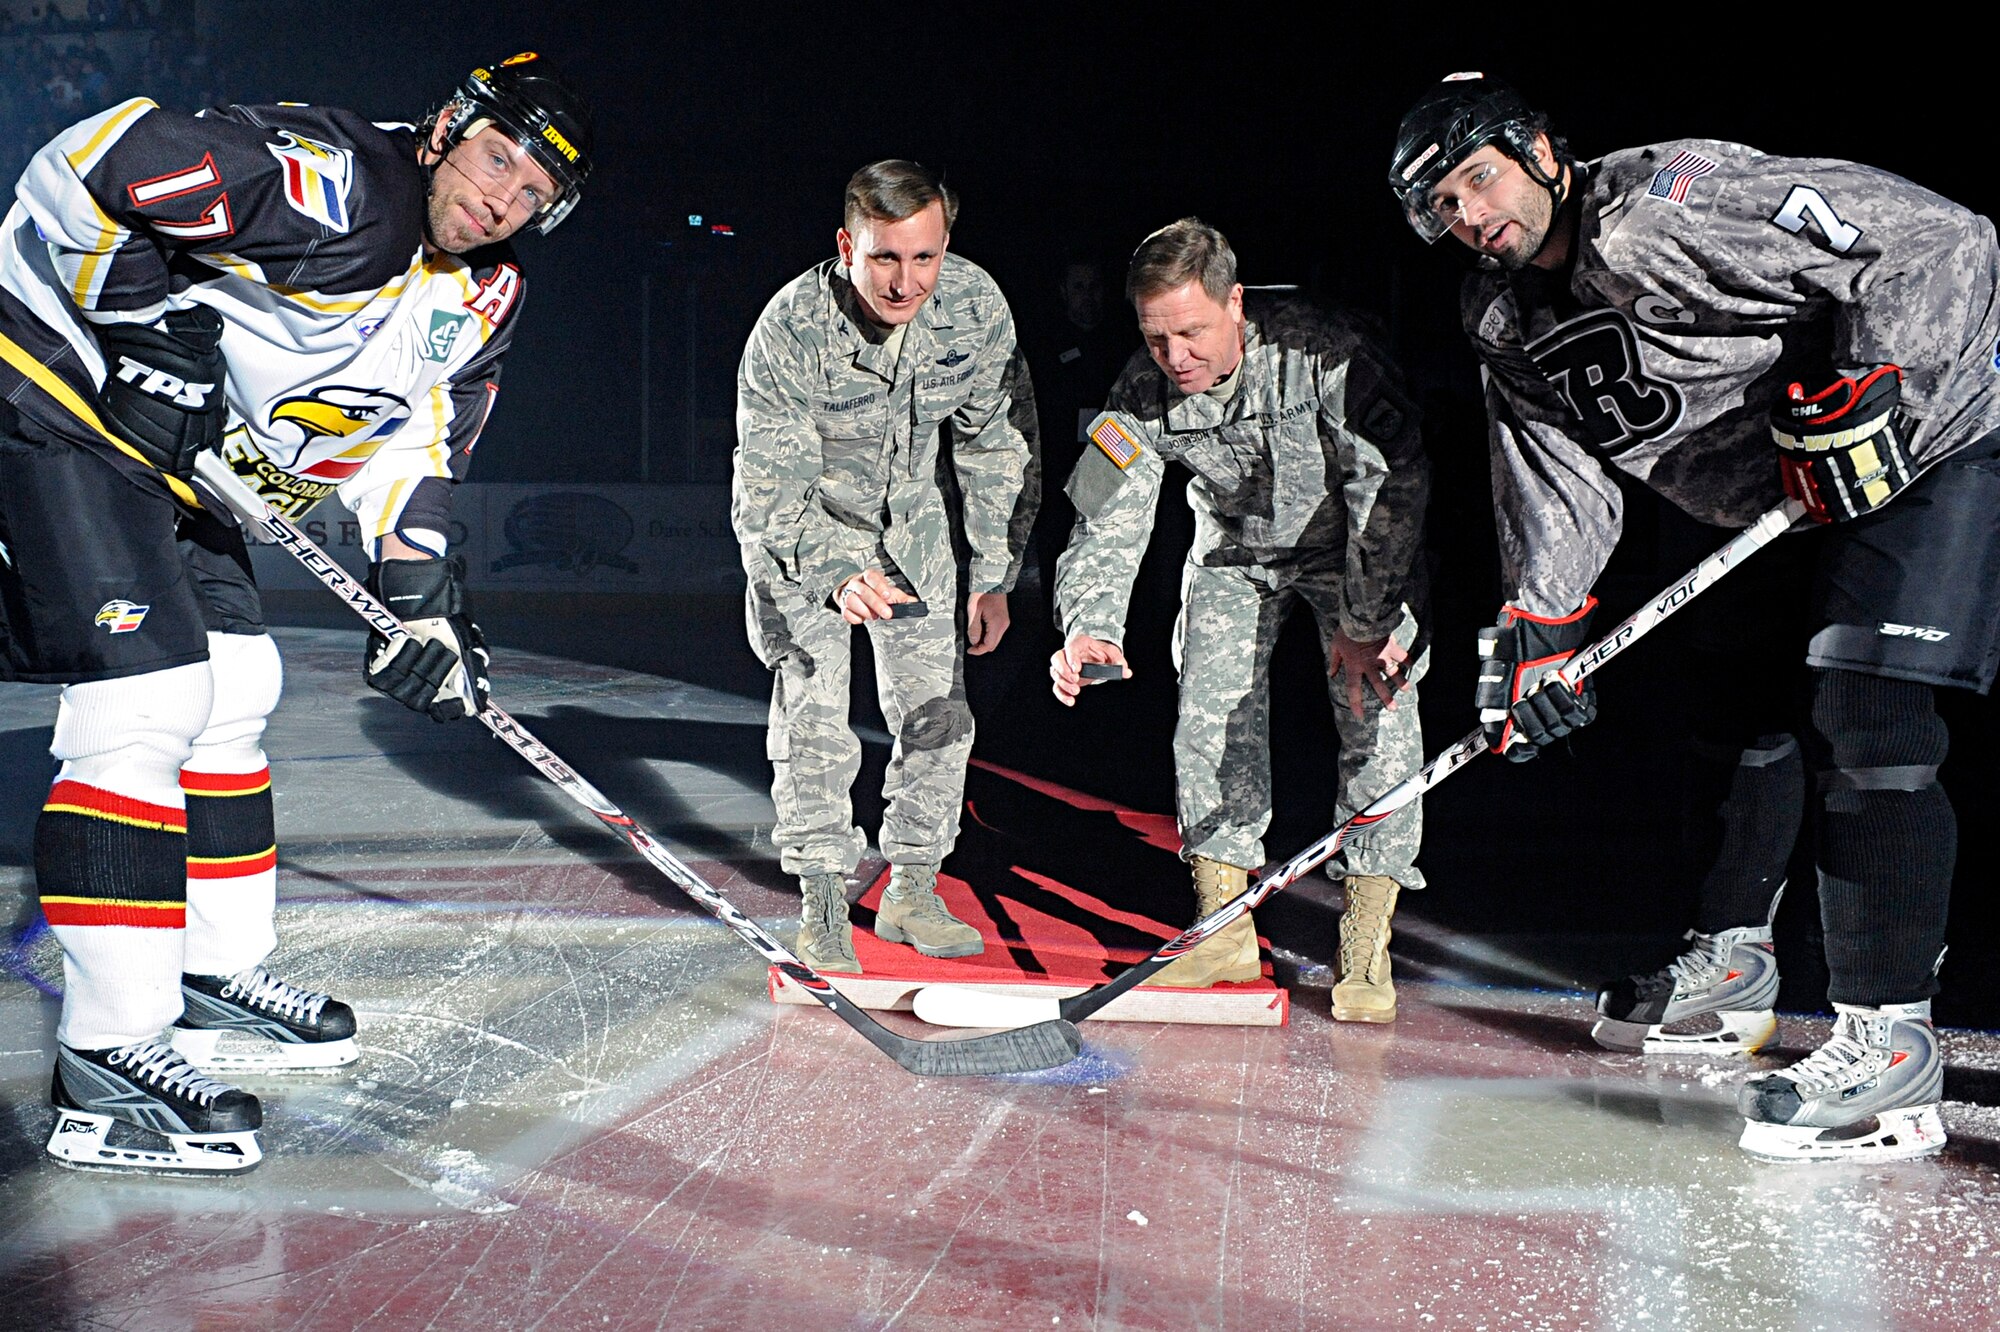 ELLSWORTH AIR FORCE BASE, S.D. -- (Center left) Col. Jeffrey Taliaferro, 28th Bomb Wing commander, and Brig. Gen. Theodore Johnson, South Dakota Army National Guard 196th Maneuver Enhancement Brigade commander, drop the ceremonial first pucks during a Military Appreciation Night hockey game Nov. 20. More than 5,000 fans attended the game between the Colorado Eagles and Rapid City Rush. (U.S. Air Force photo/Airman 1st Class Matthew Flynn)
